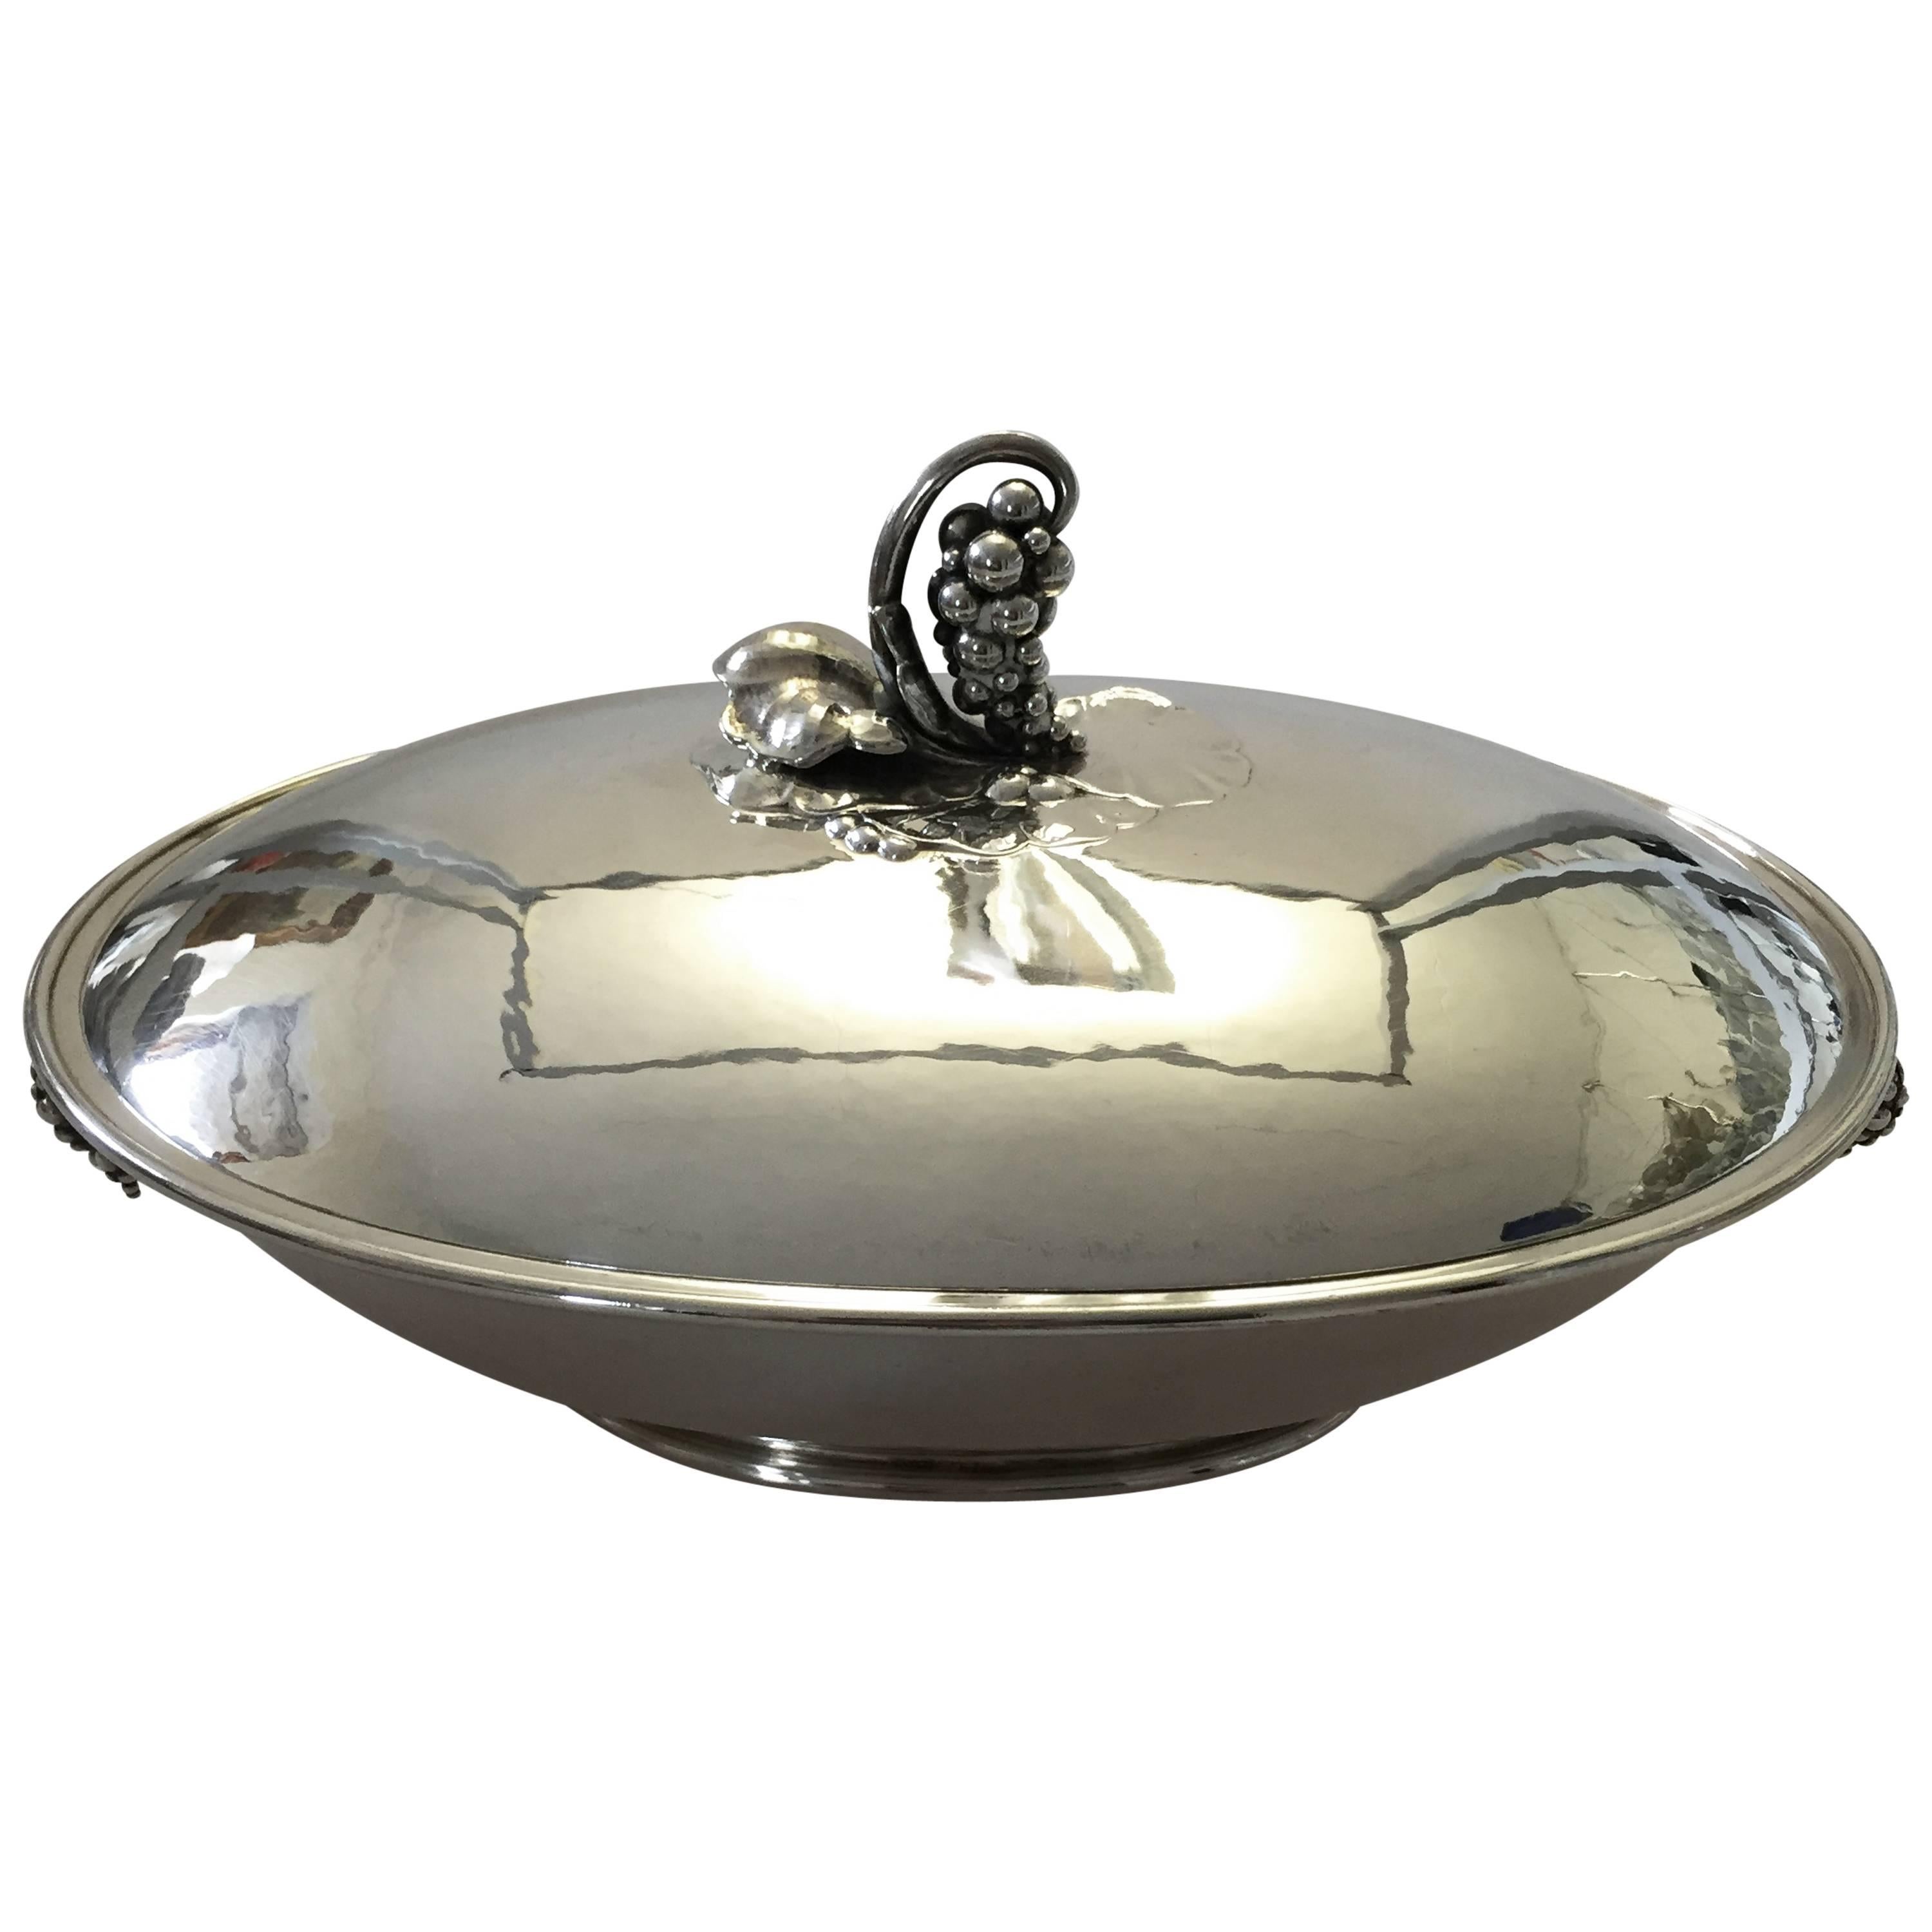 Georg Jensen Sterling Silver Oval Serving Dish with Cover